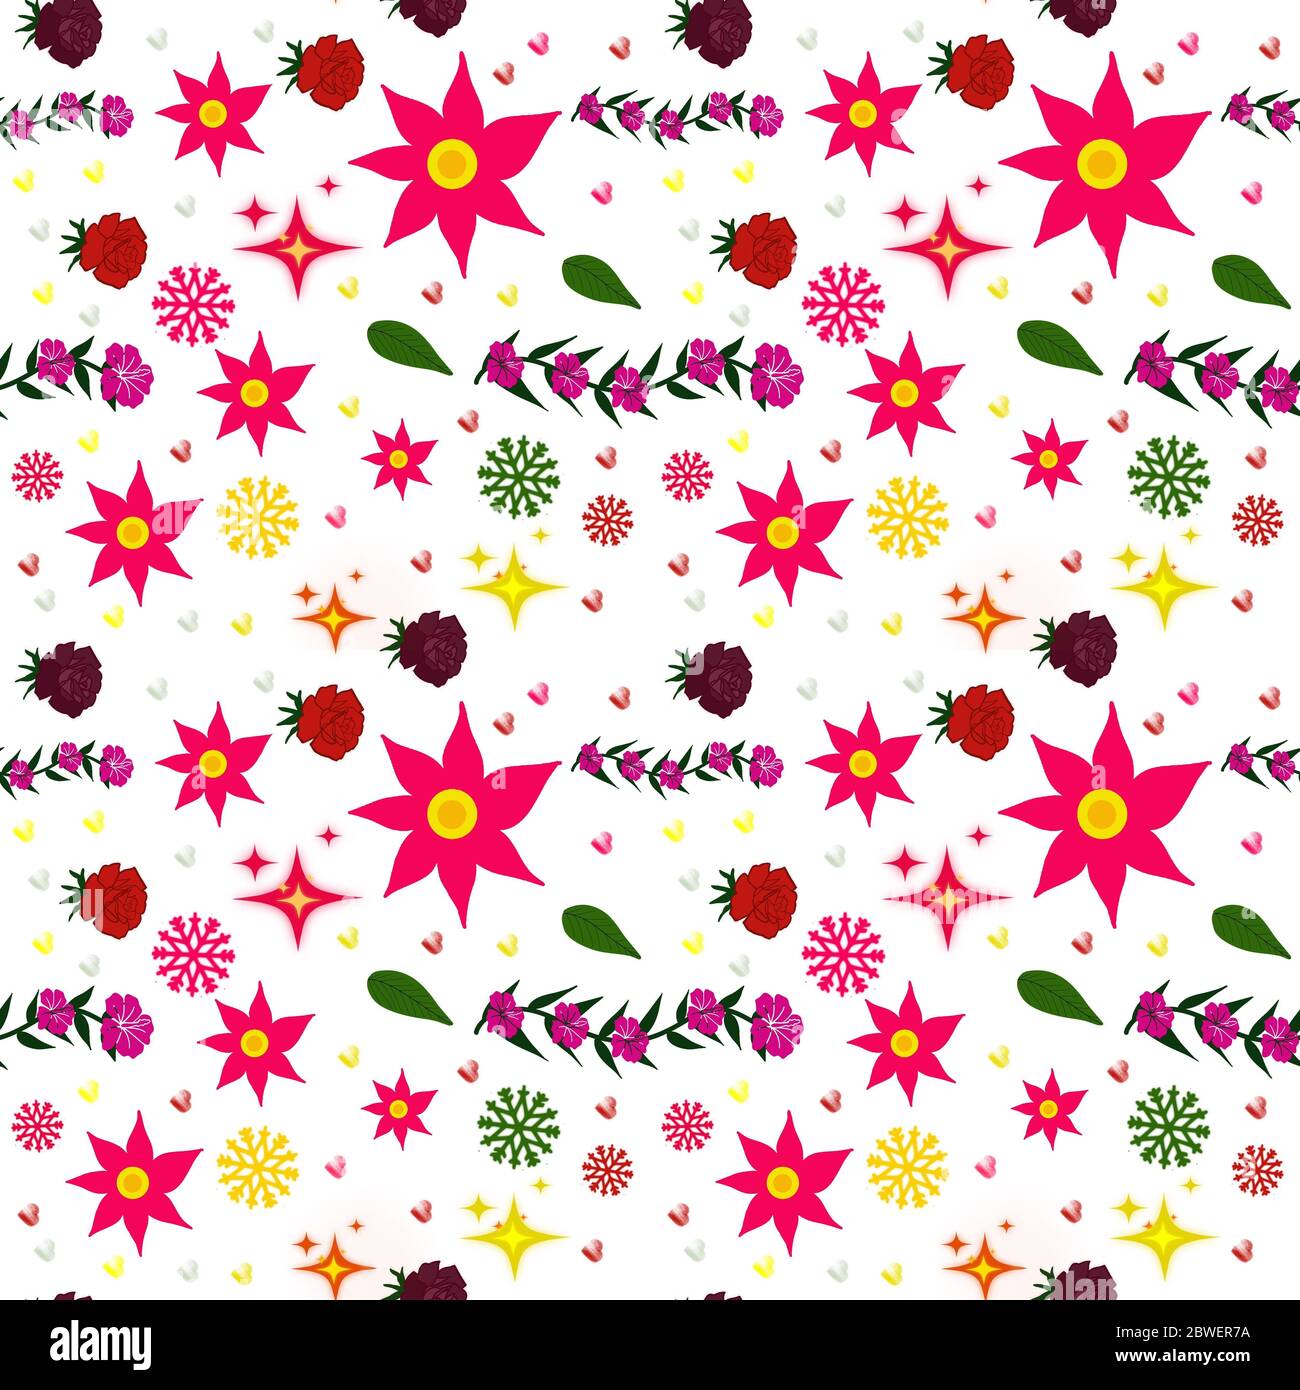 Illustration of seamless pattern of various colorul flowers isolated on white background. High quality illustration Stock Photo